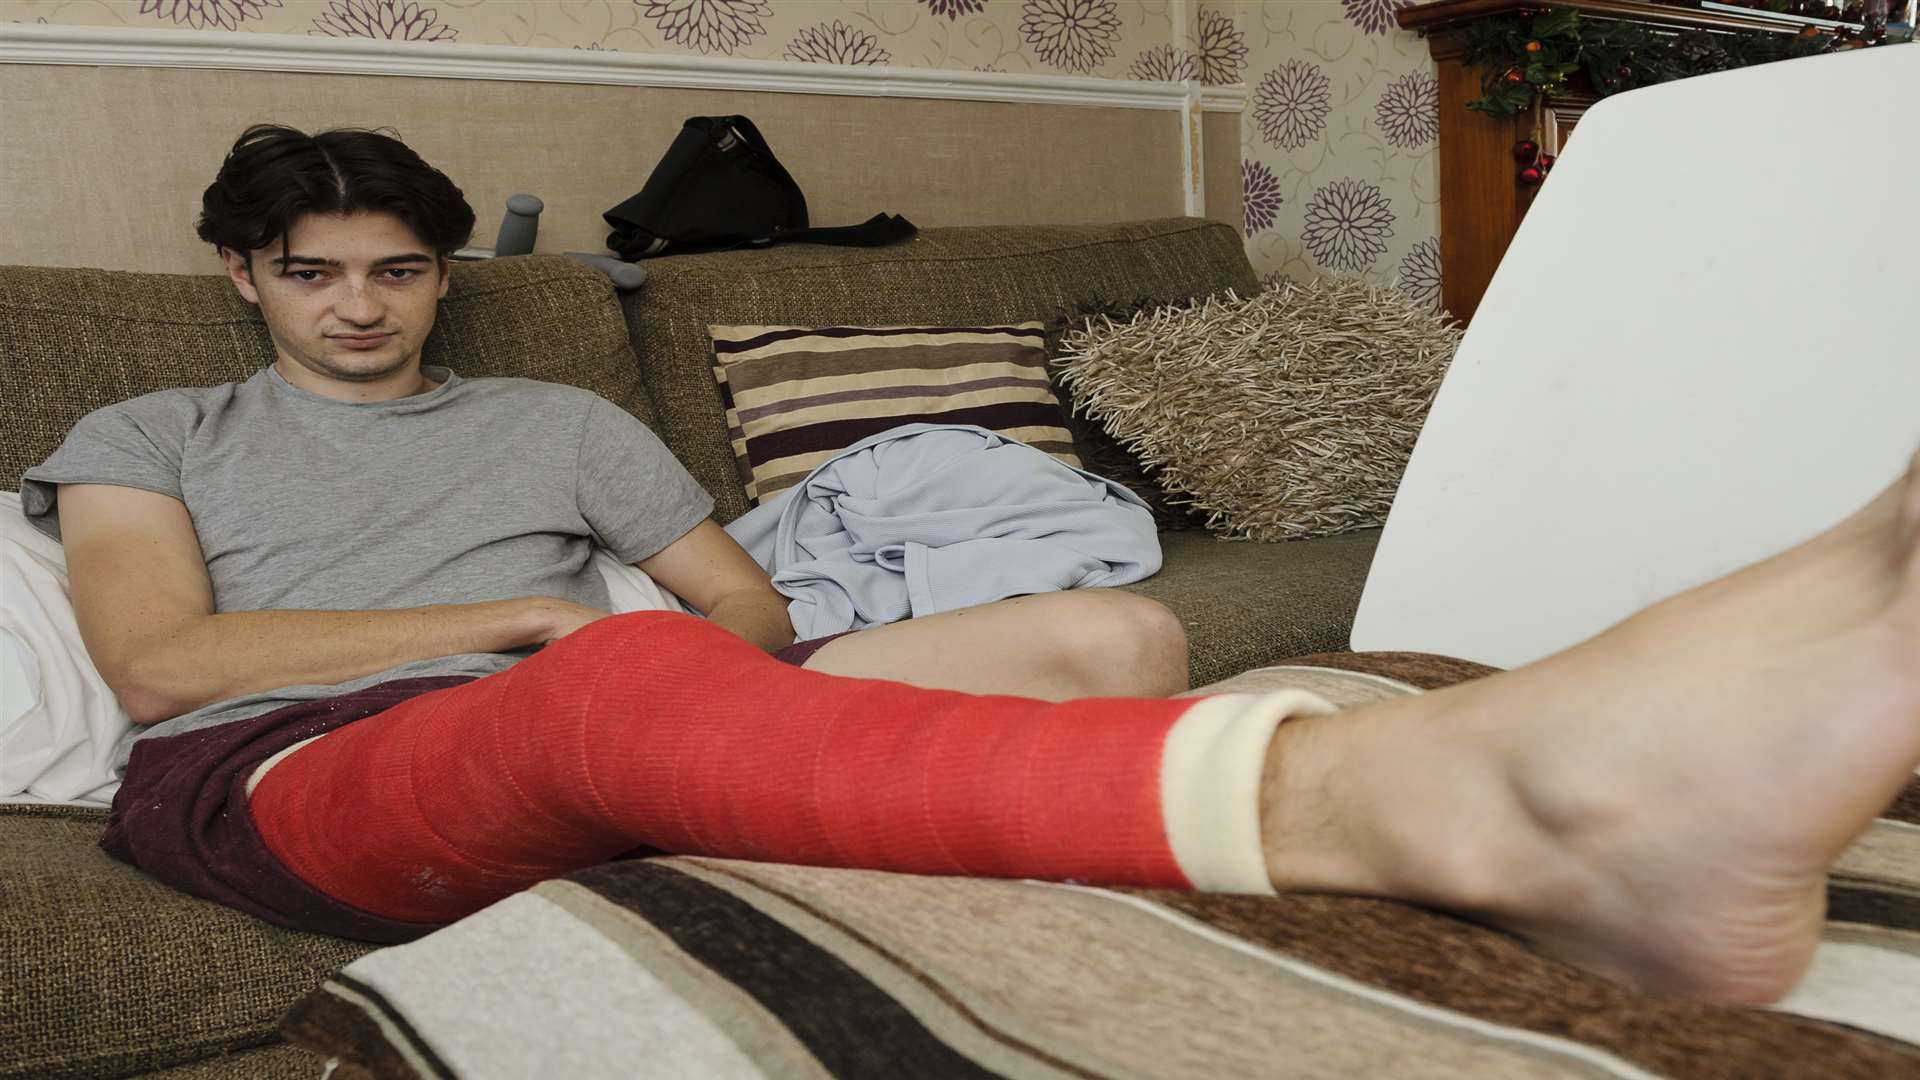 Harry Hoe, living at Balmoral Road, Suton-at-Hone, says he has been badly let down by Darent Valley Hospital after breaking his knee in a crash